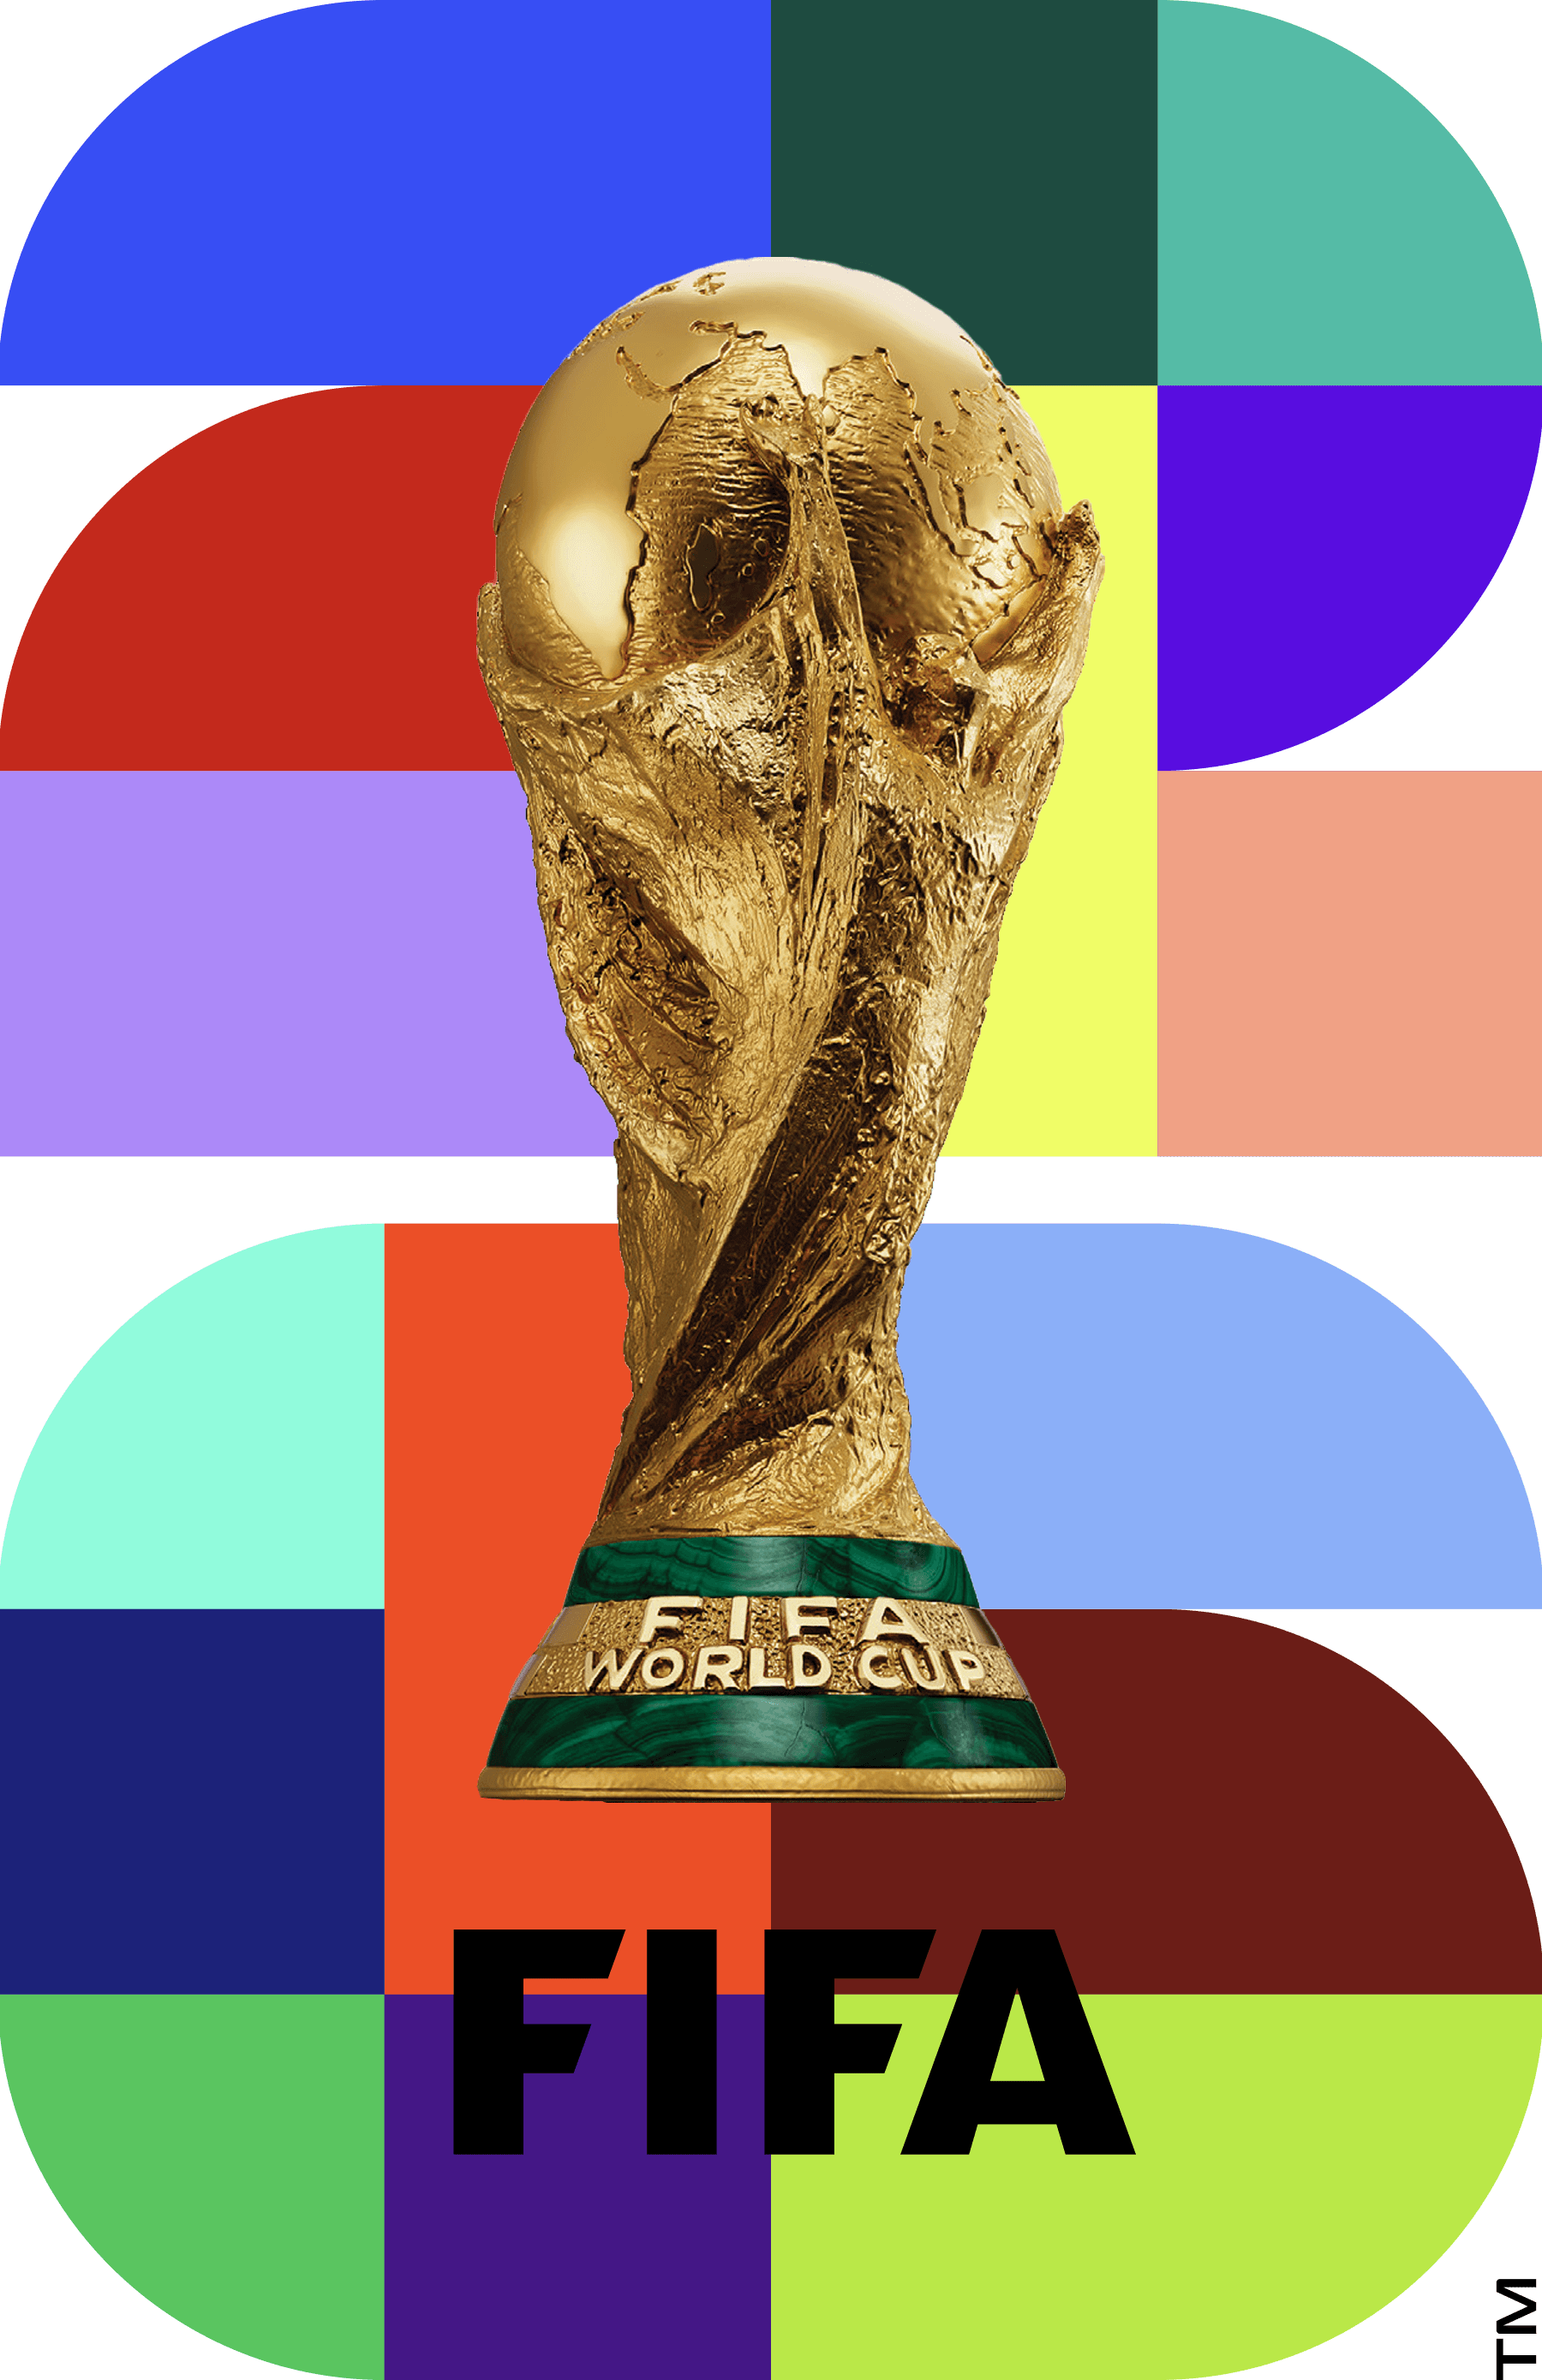 Evolution of FIFA World Cup Logos: From 1930 to 2022